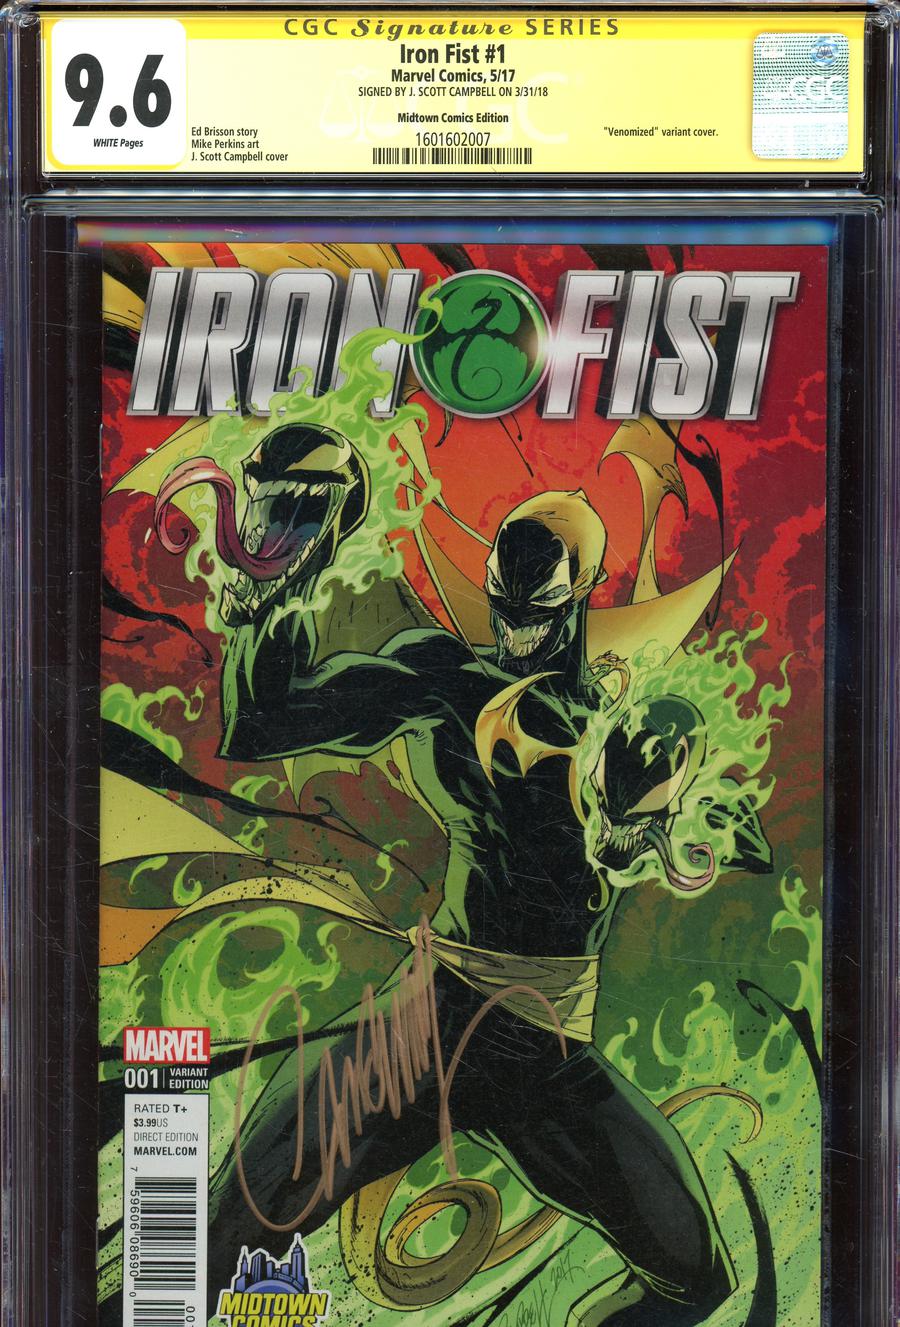 Iron Fist Vol 5 #1  Midtown Exclusive J Scott Campbell Venomized Color Variant Cover Signed By J Scott Campbell CGC 9.6